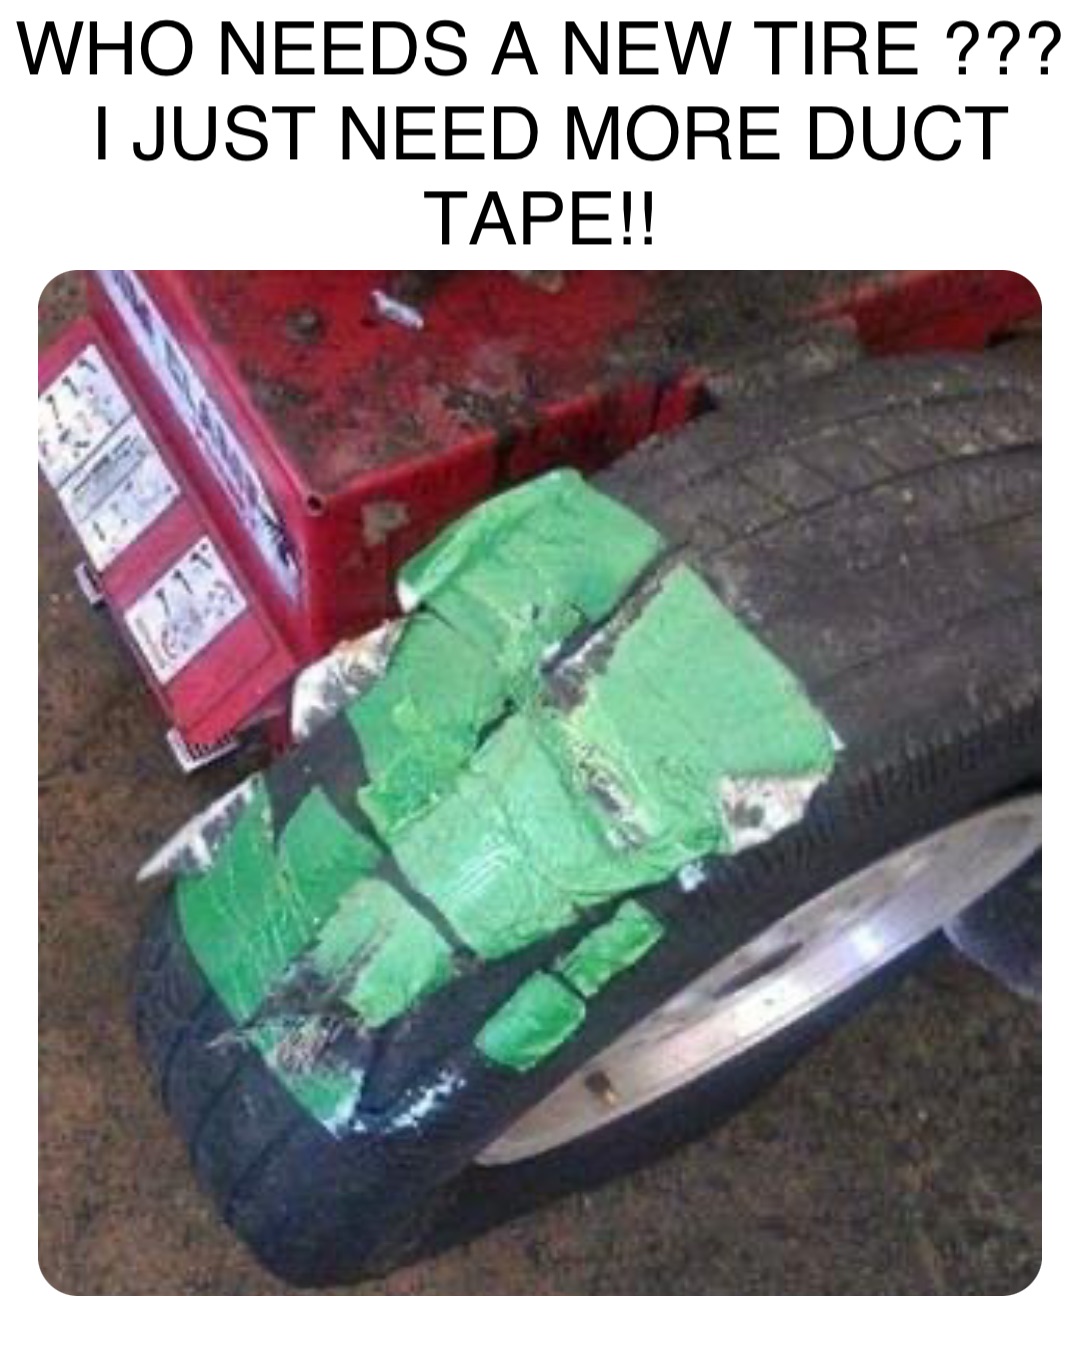 Double tap to edit WHO NEEDS A NEW TIRE ??? 
I JUST NEED MORE DUCT TAPE!!